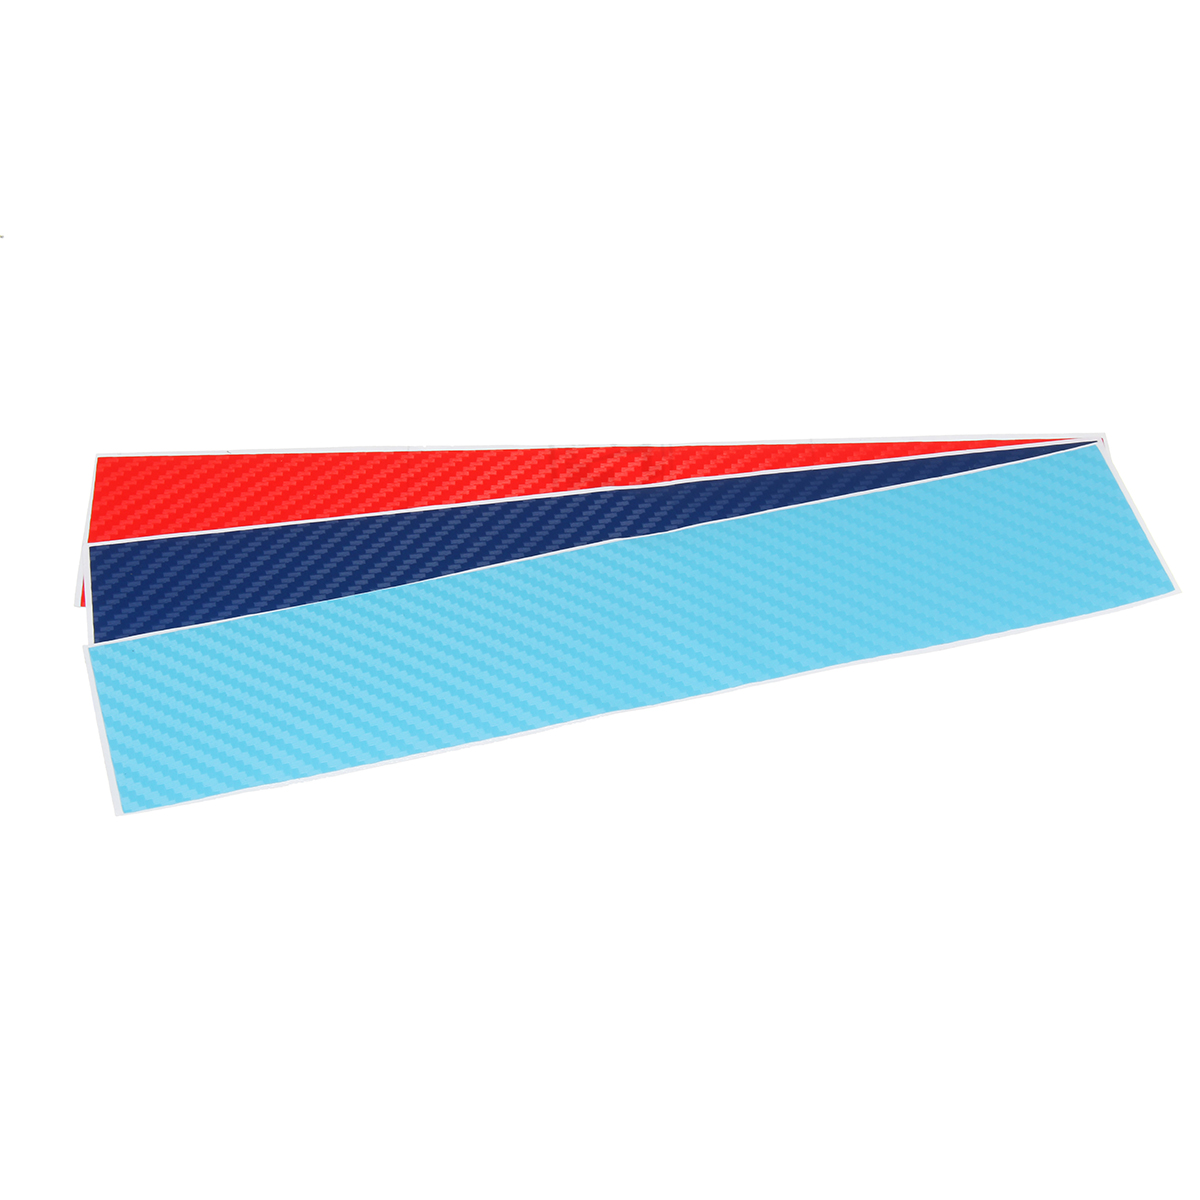 3-Colors-Carbon-Fiber-Stripe-Sticker-Decal-For-BMW-Front-Grill-Grille-Exterior-Decoration-Car-Sticke-1562468-6